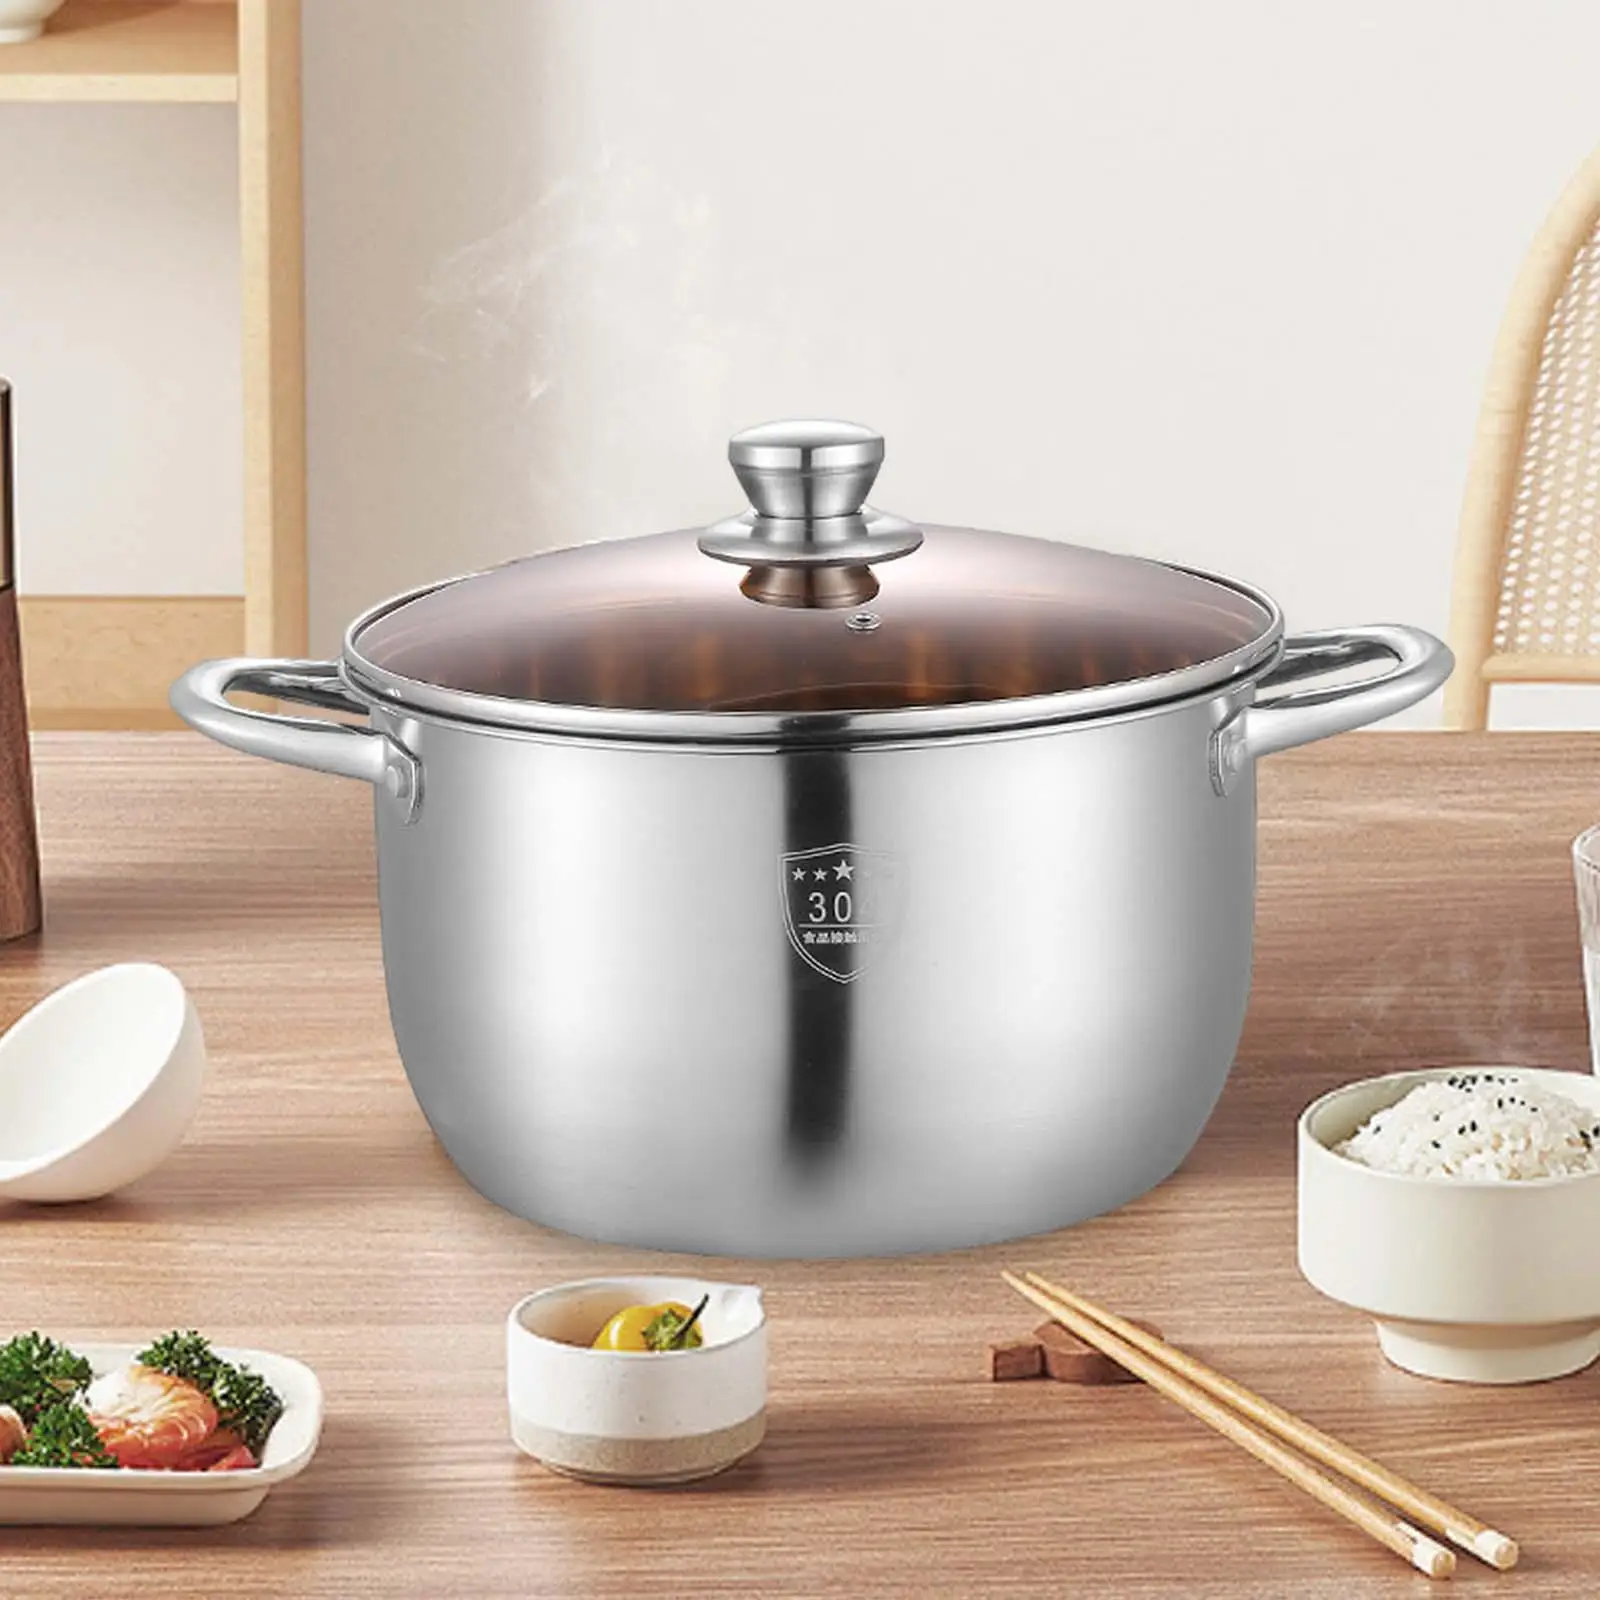 Stainless Steel Stockpot with Lid Perfect Size Heatproof Handle Small Saucepan for Warming Milk Vegetables Meat Soup Noodles